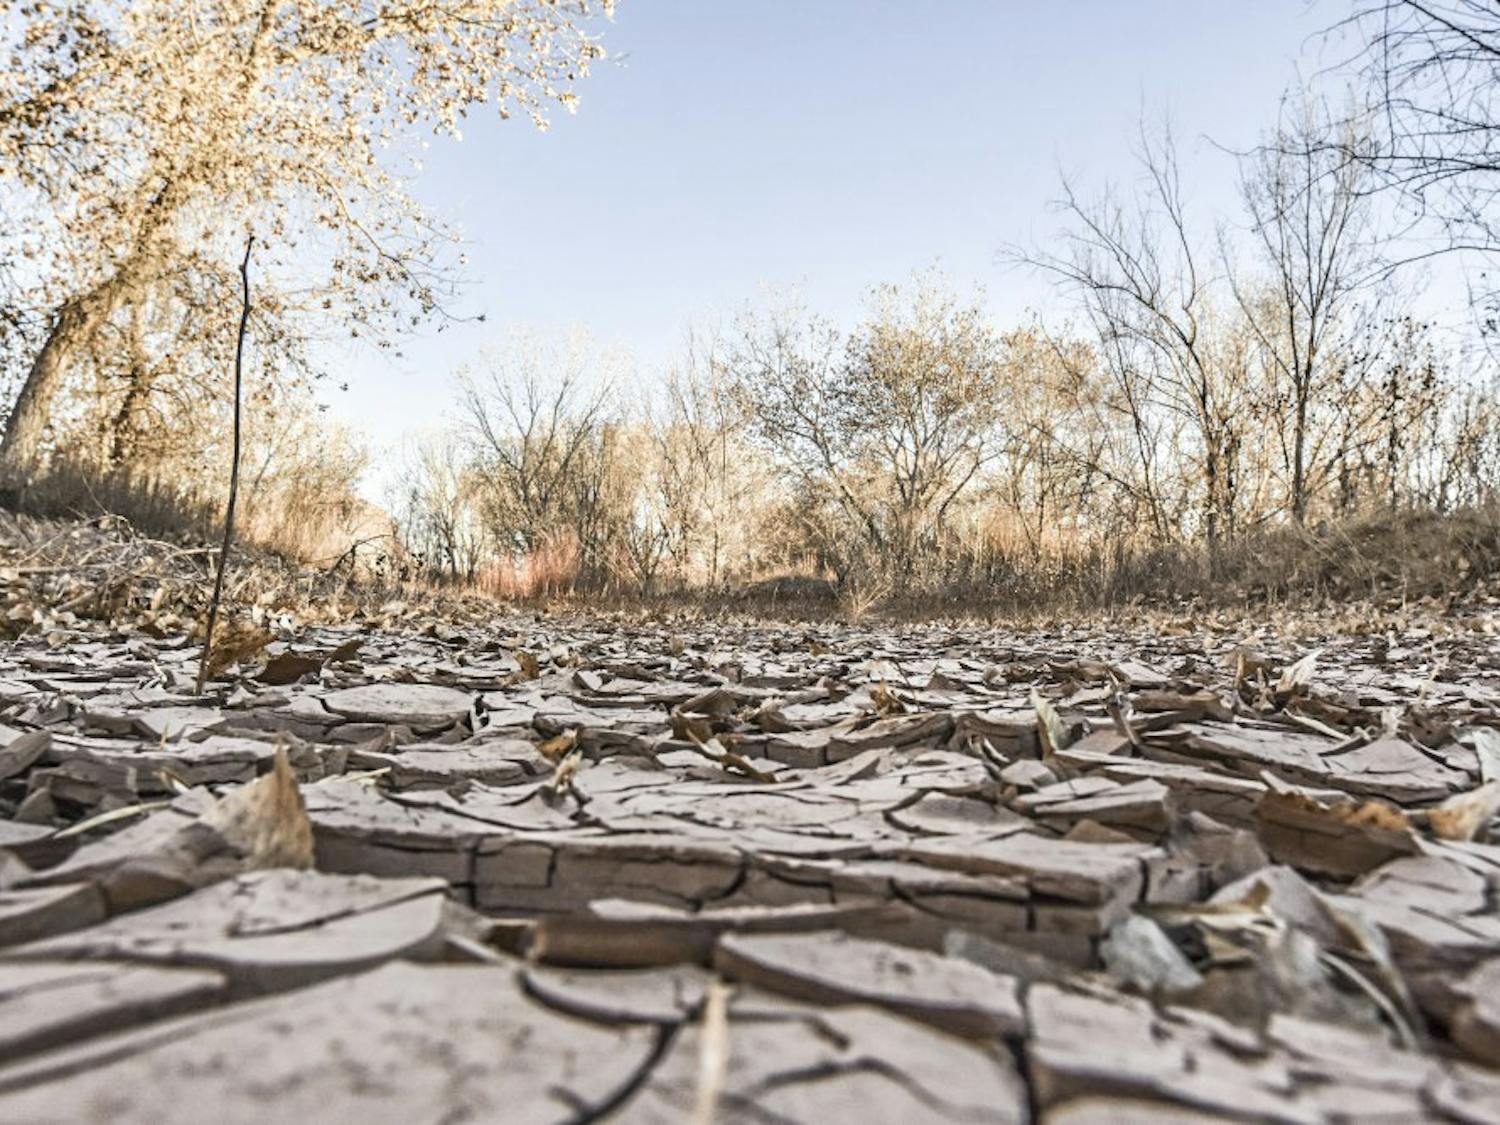 Mudcracks cover dry areas in the Bosque.